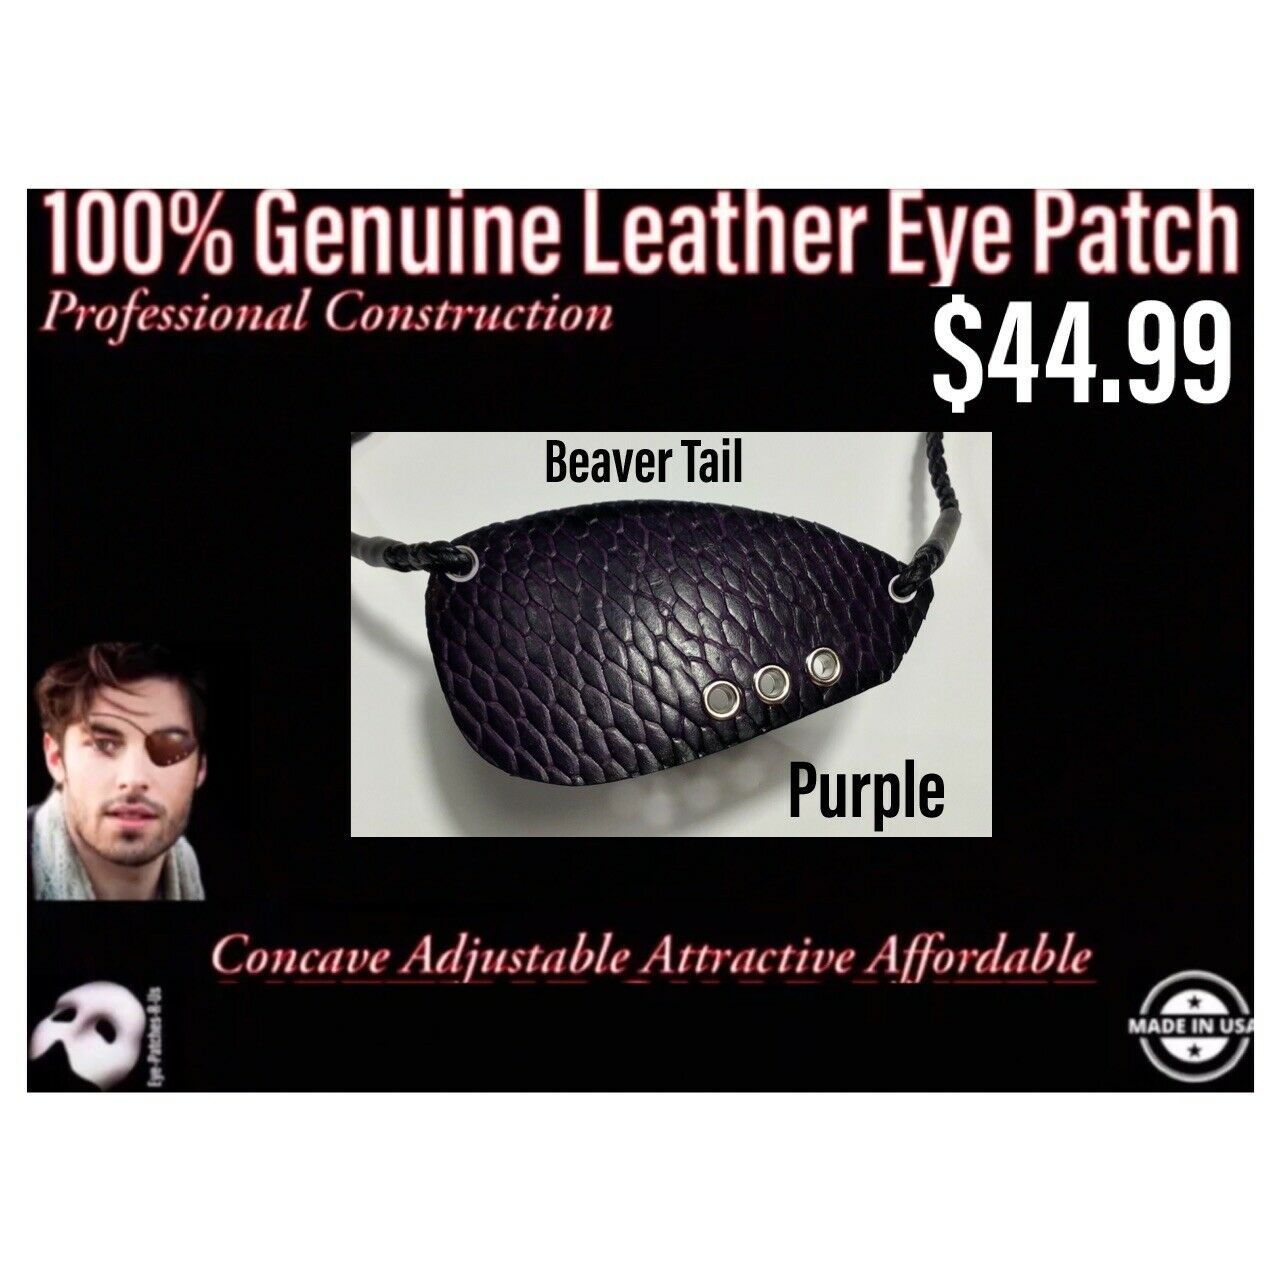 Beaver Tail - Leather Lined Patch at Eye Patches R Us - C.O.A. - Crenshaw Cut